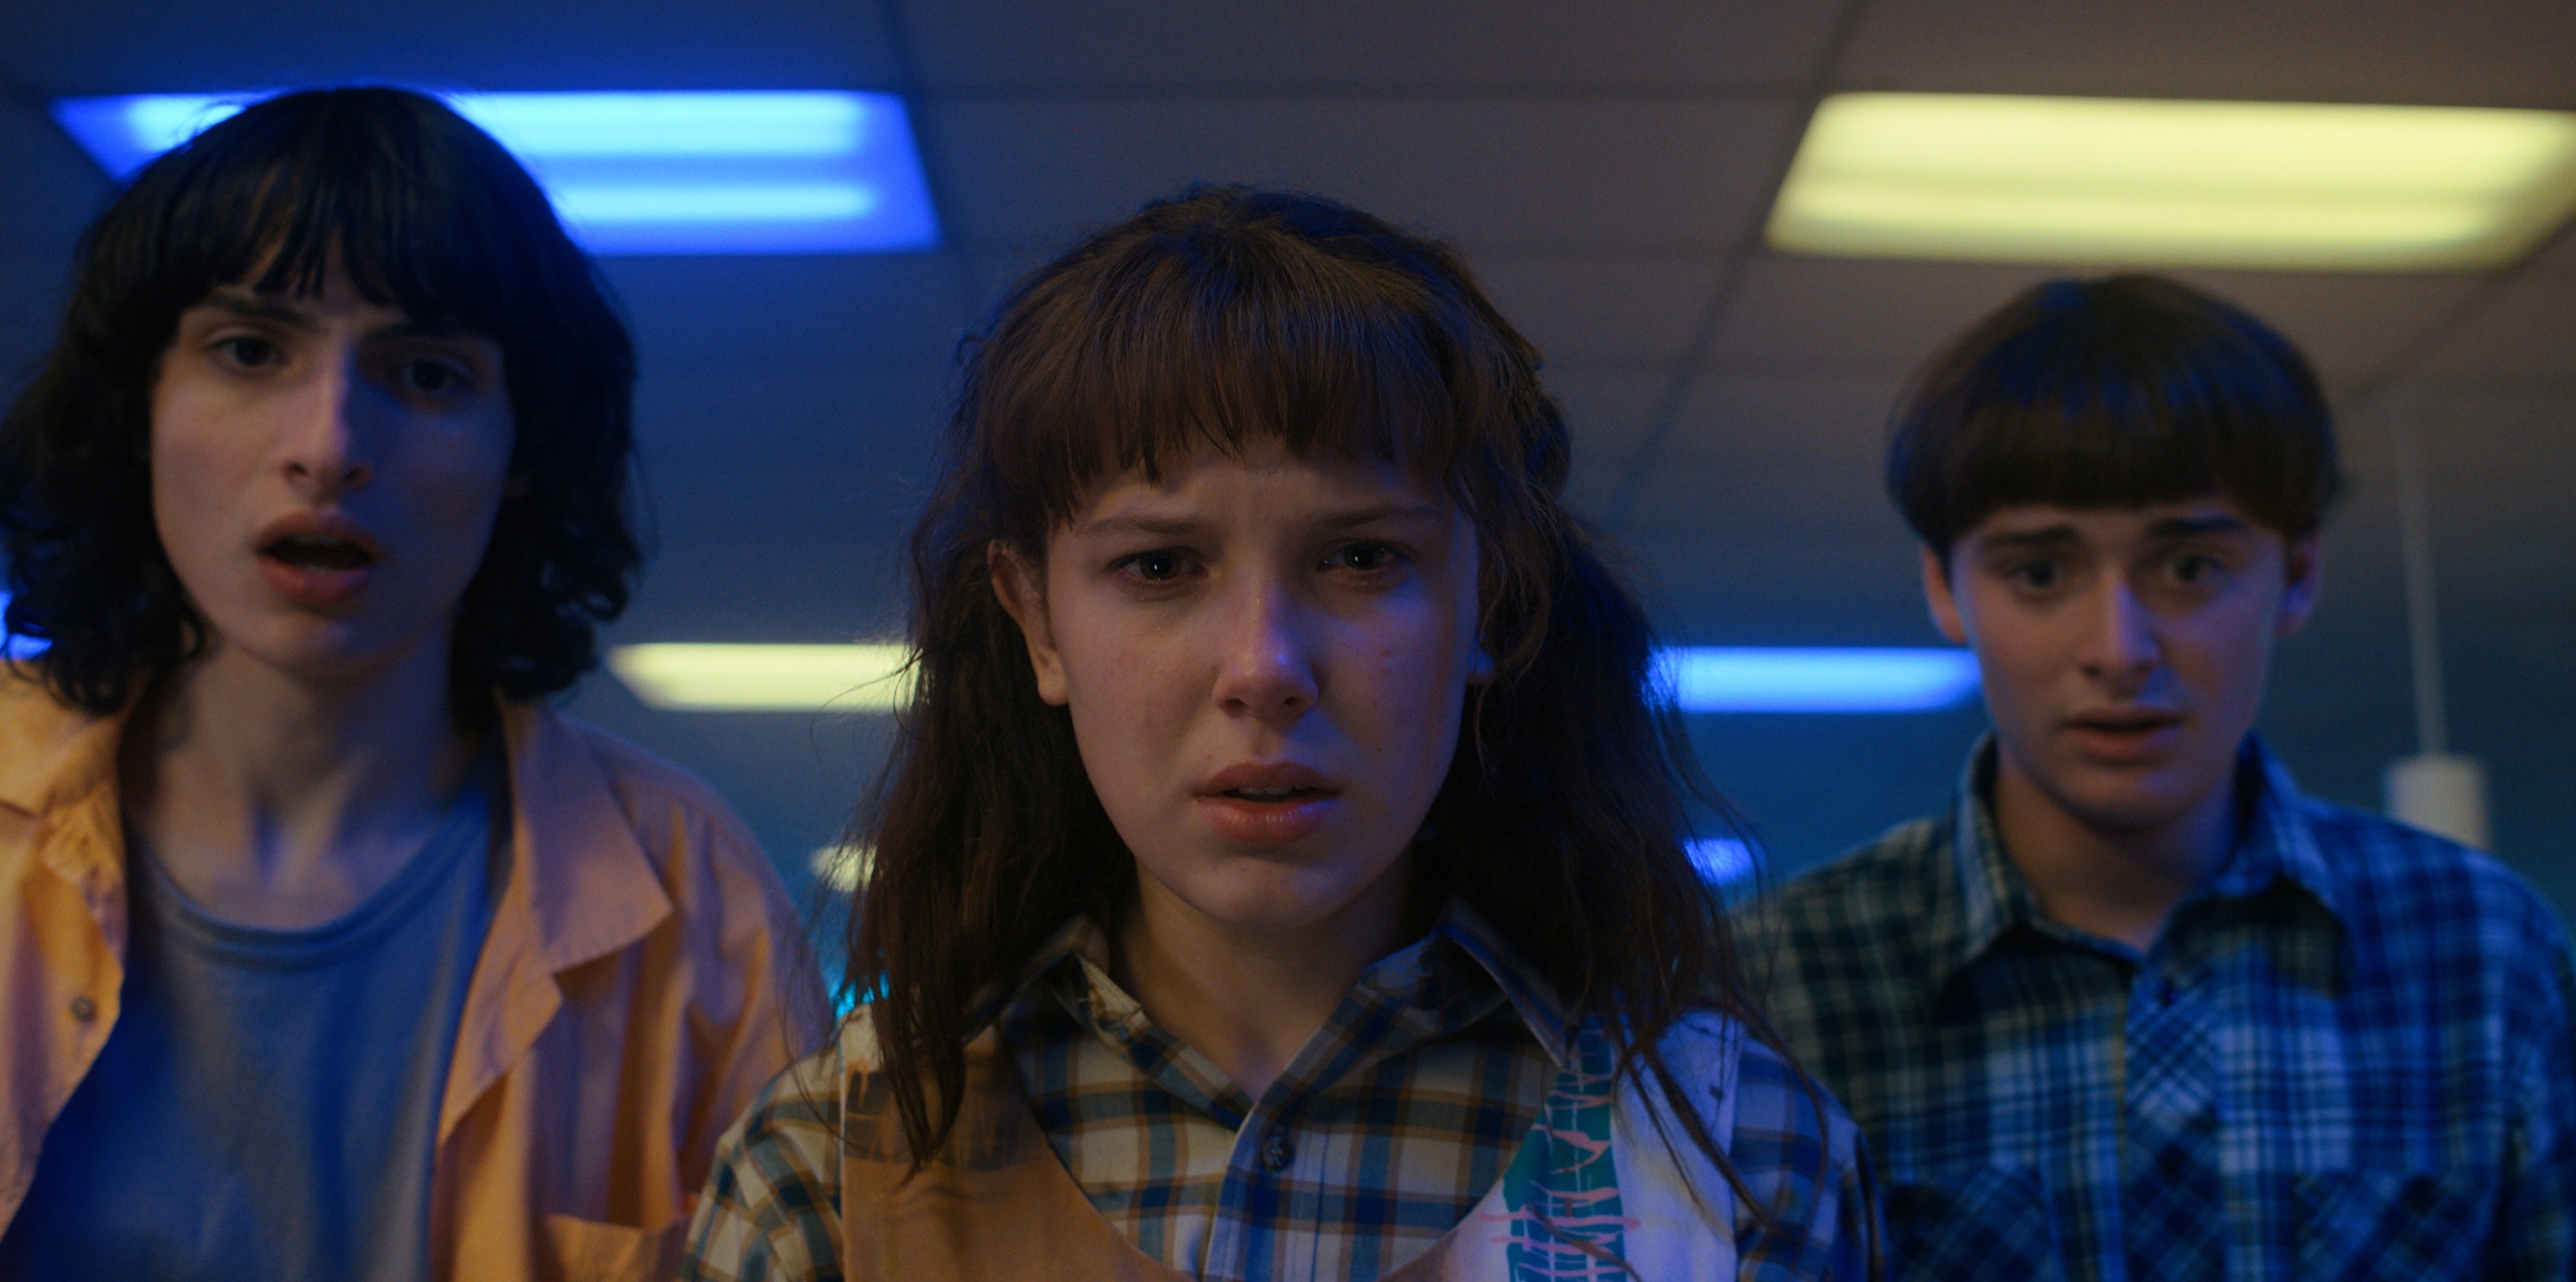 Everything you need to know before watching the new season of Stranger Things